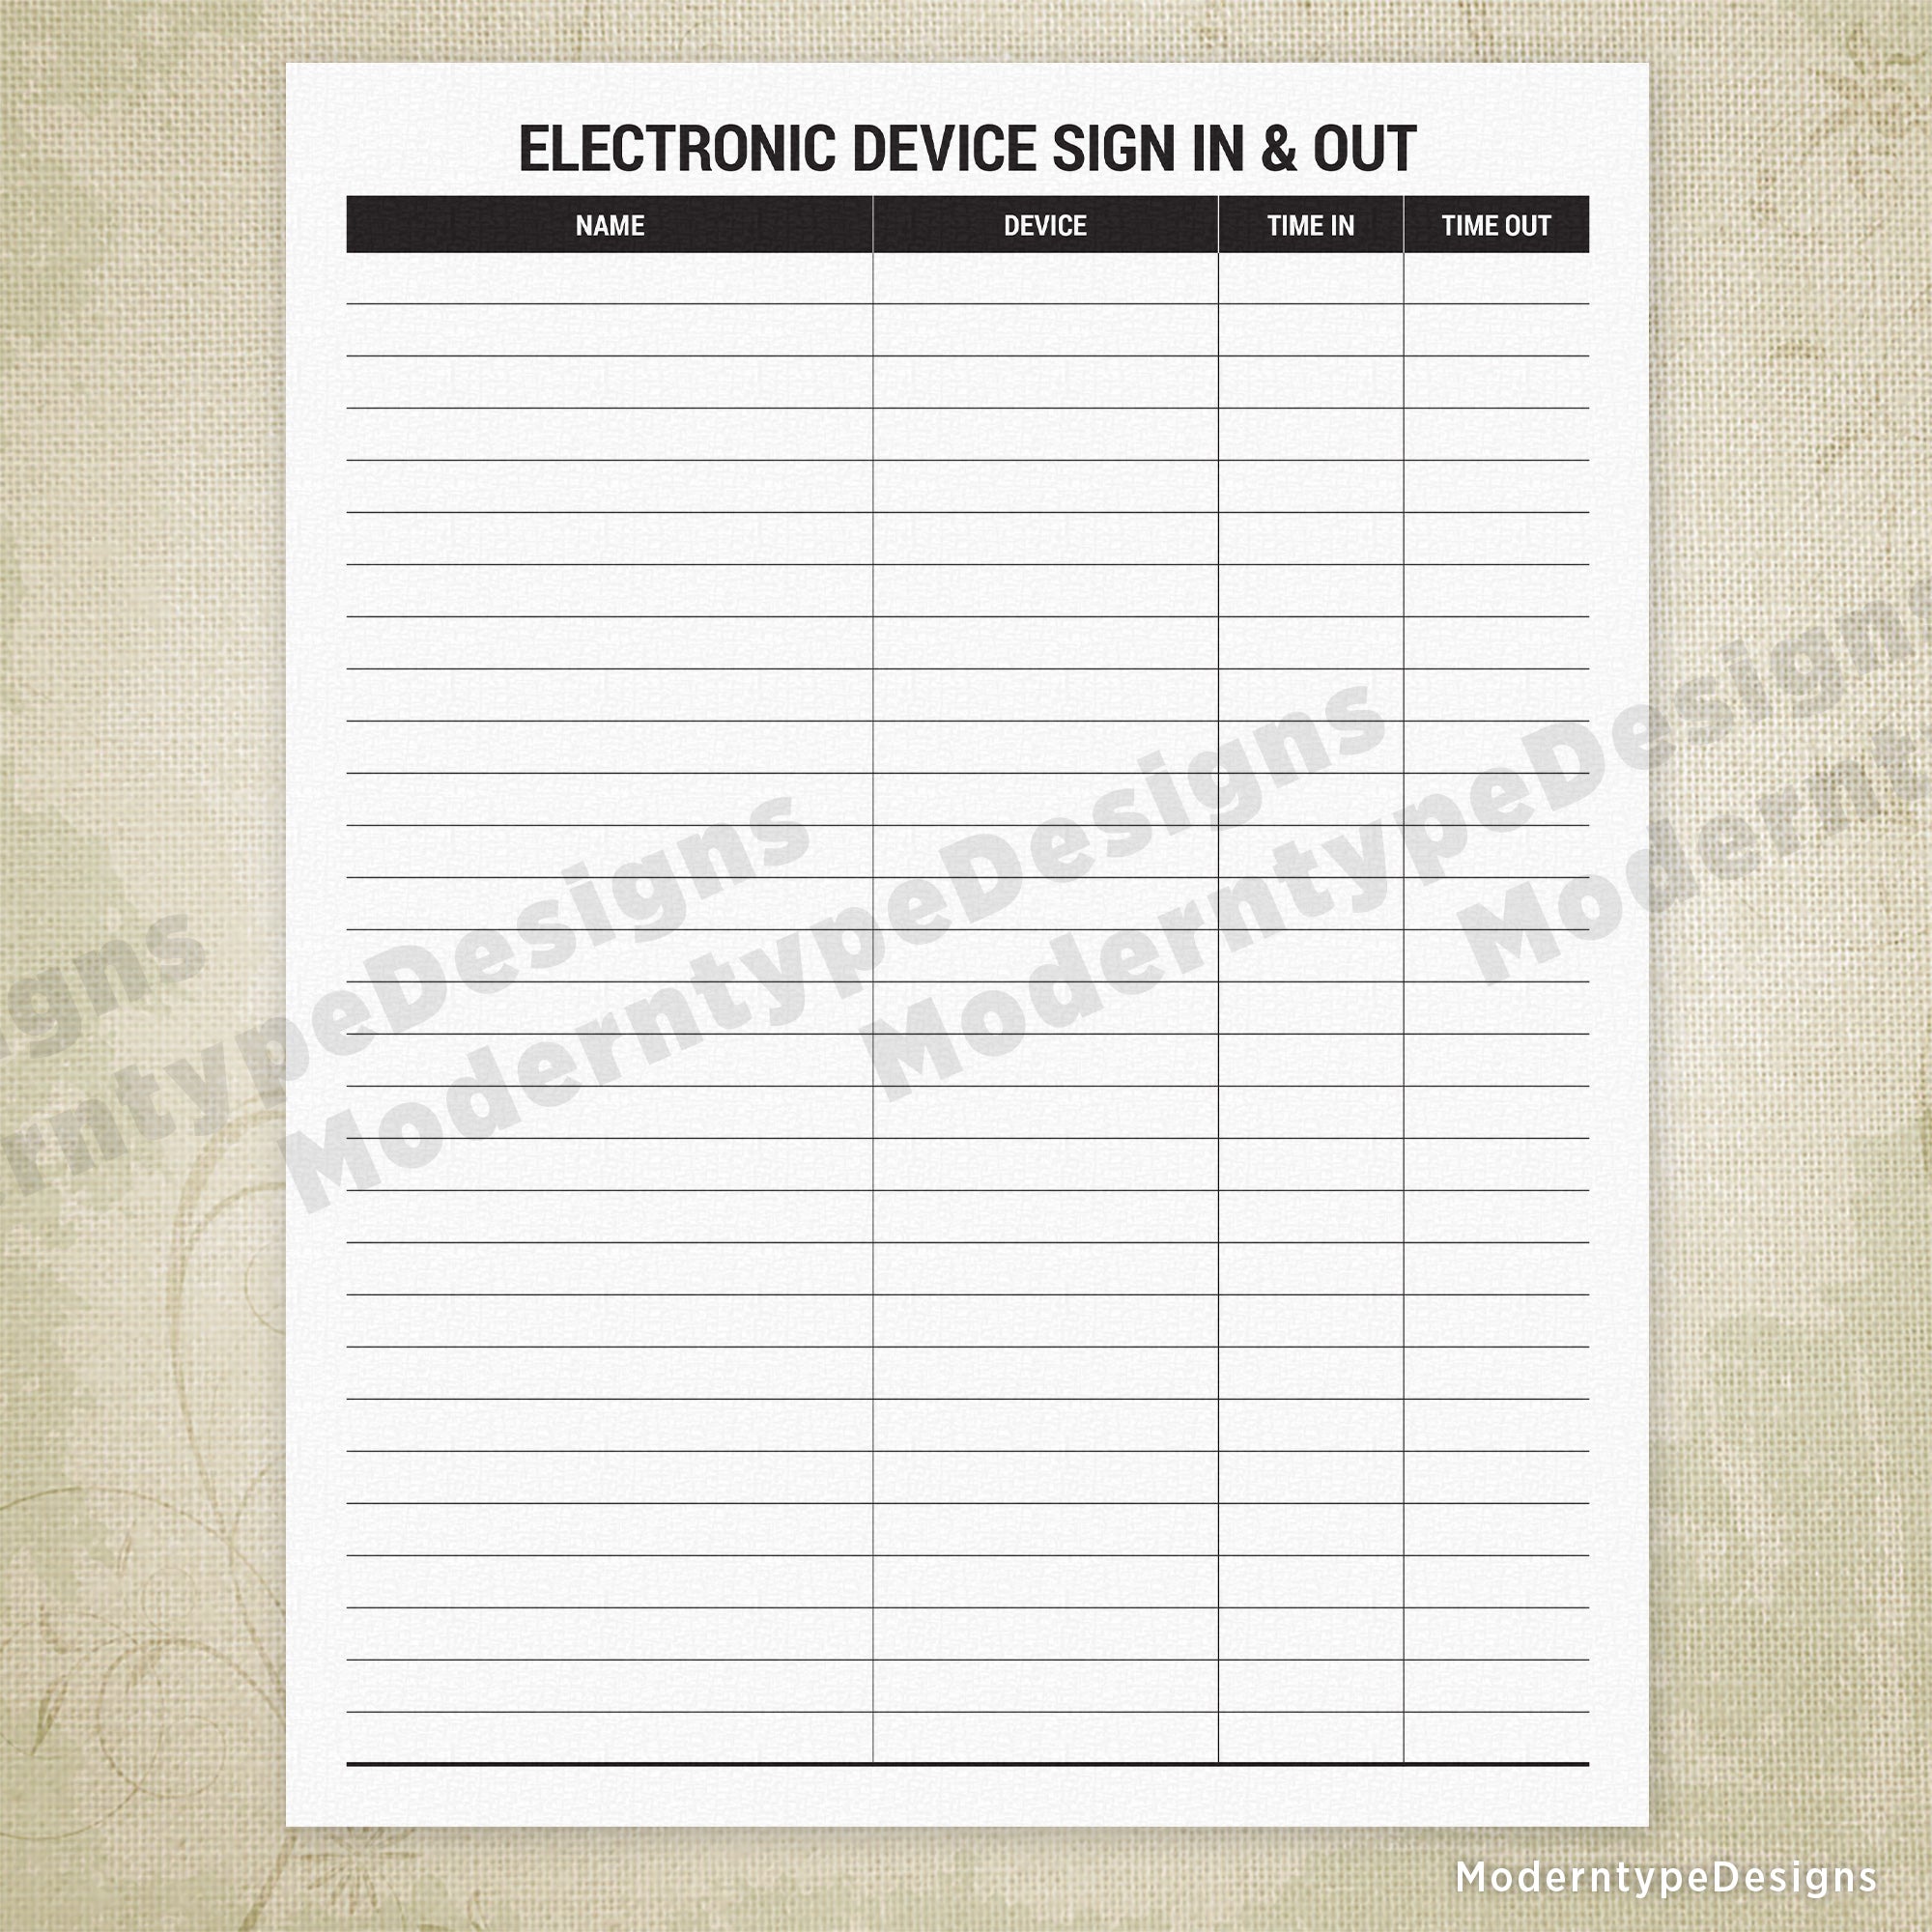 Electronic Device Sign In & Out Printable Form